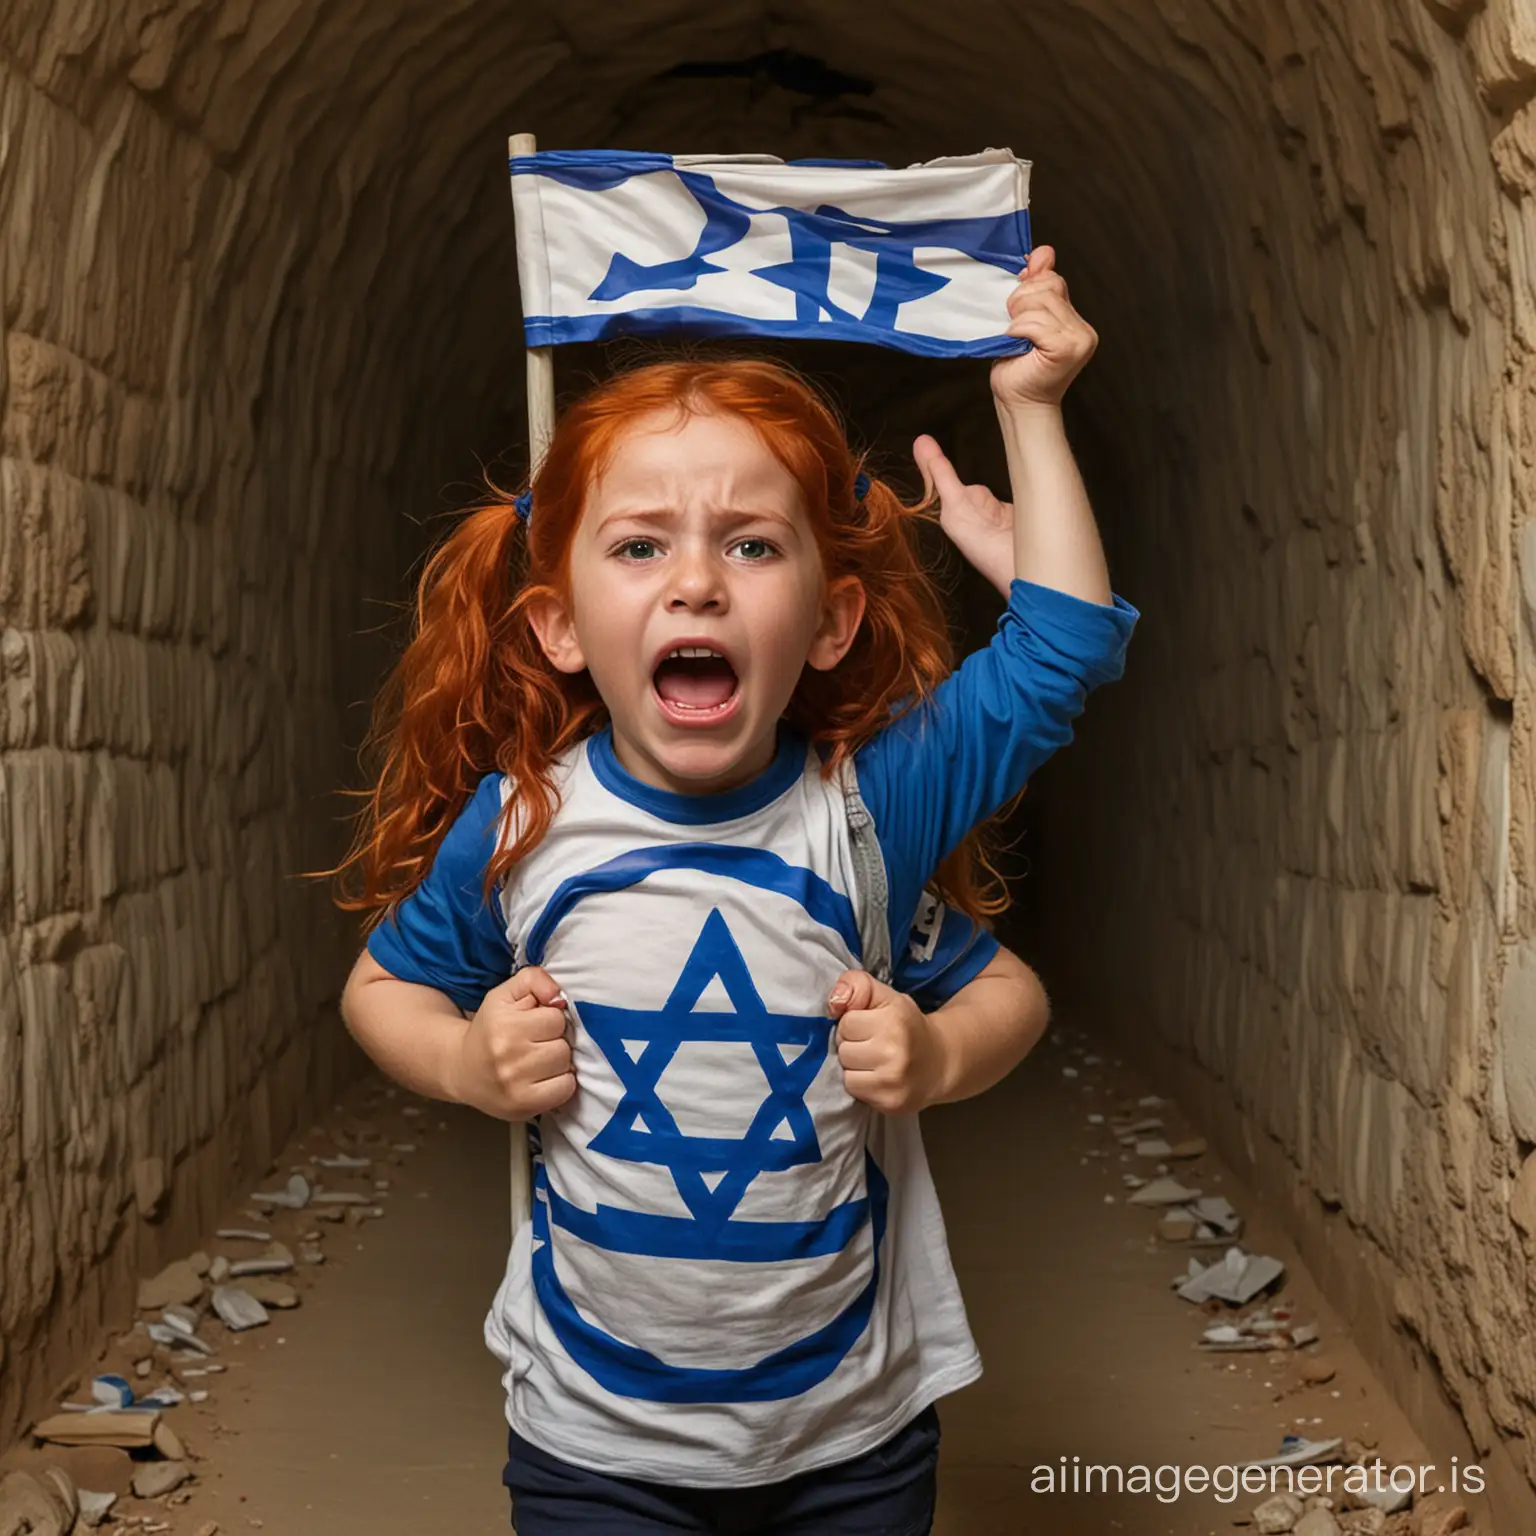 Israeli-Child-Girl-Crying-Held-Hostage-in-Tunnel-with-Flag-Emotional-Crisis